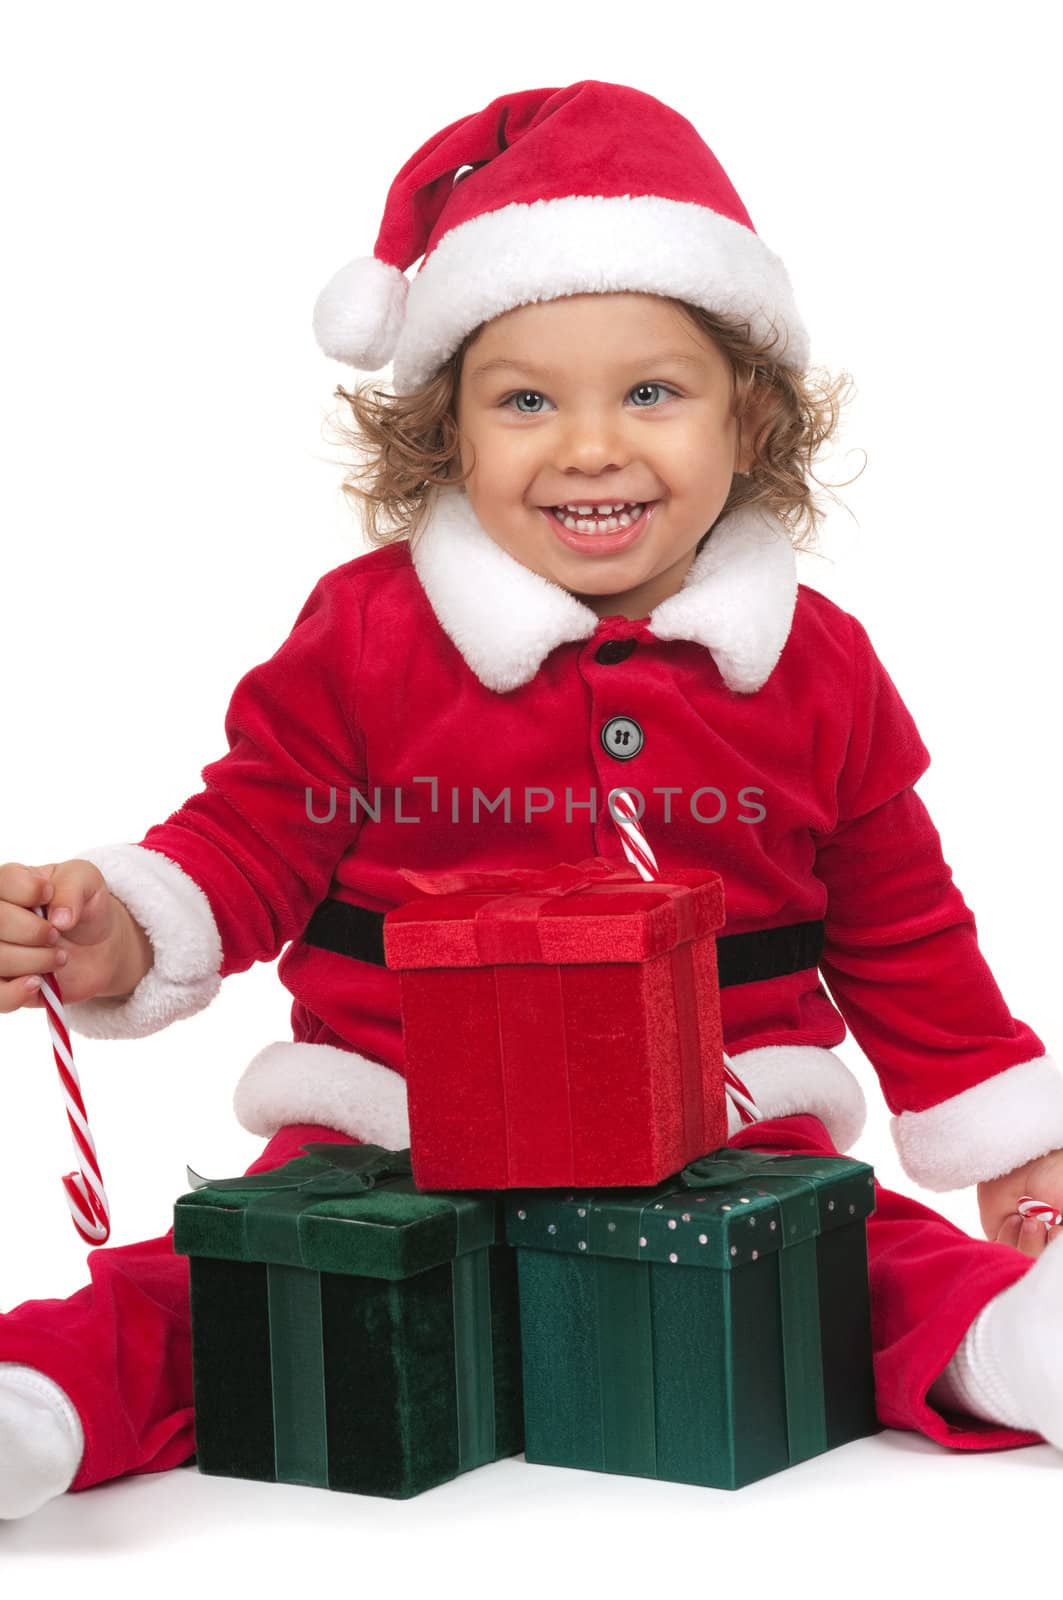 Cute child with Santa Claus outfit